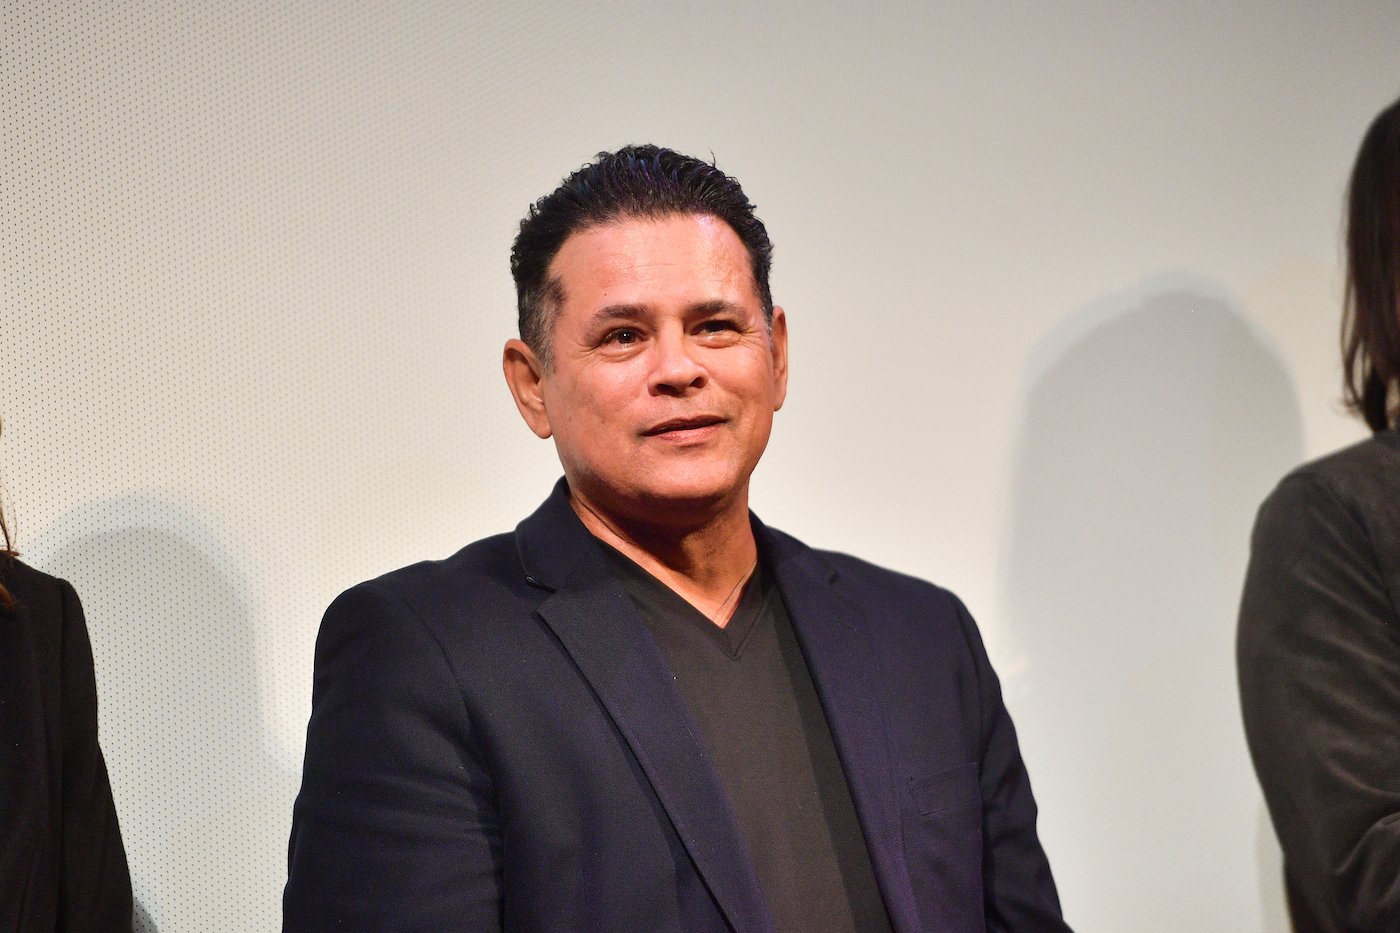 Raymond Cruz, who starred as Tuco Salamanca in 'Breaking Bad' and 'Better Call Saul' at a SXSW event